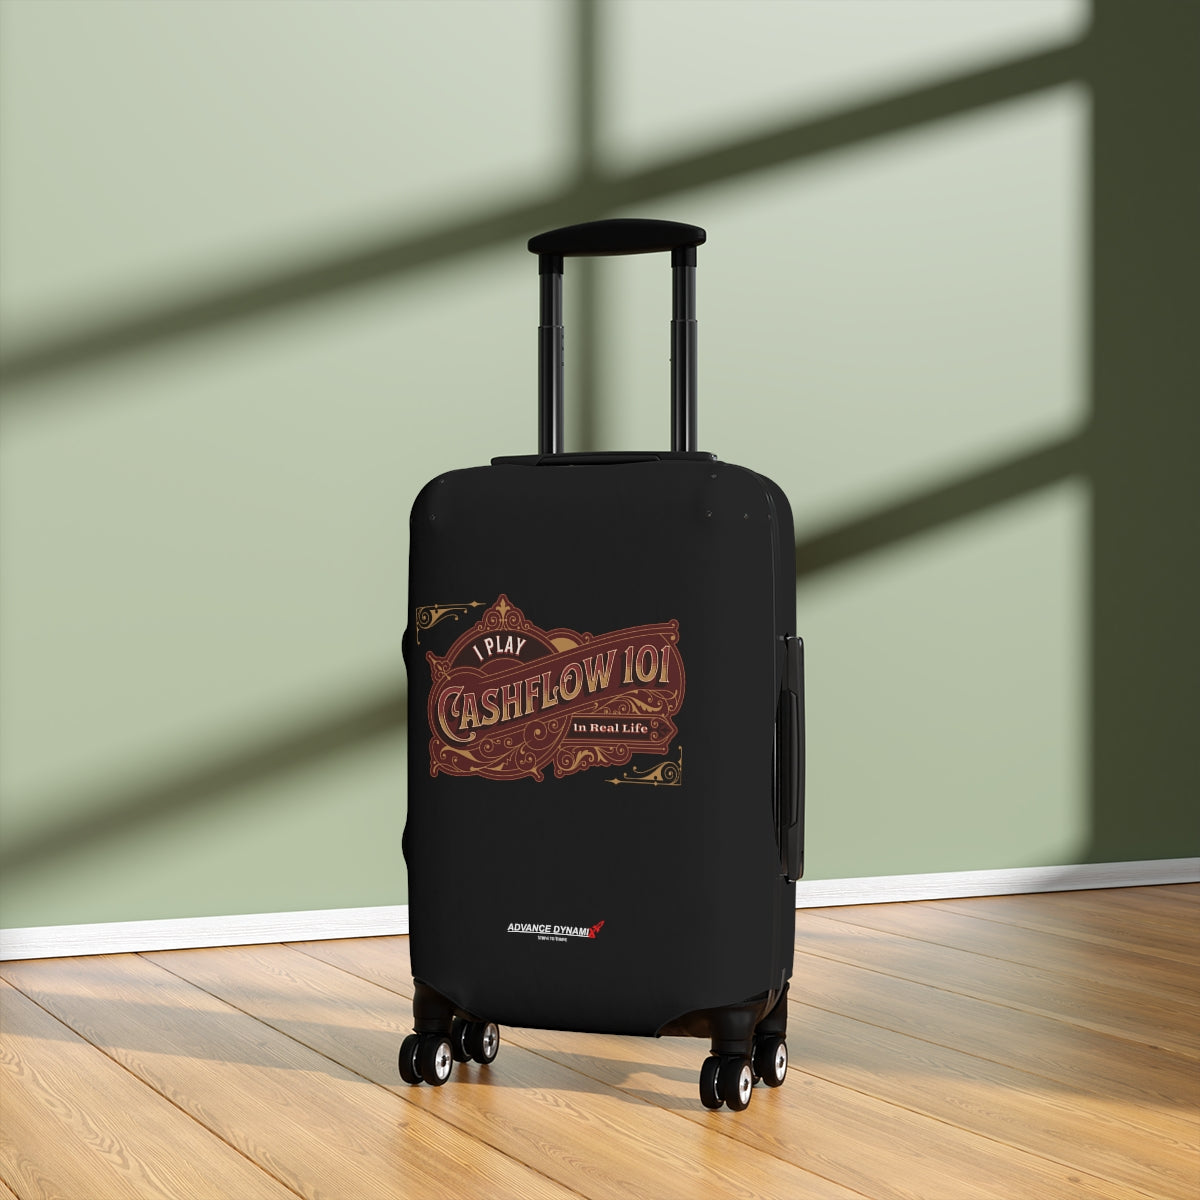 I play Cashflow 101 in real life - Luggage Covers Infused with Advance Dynamix Add-A-Tude - Tell the world!